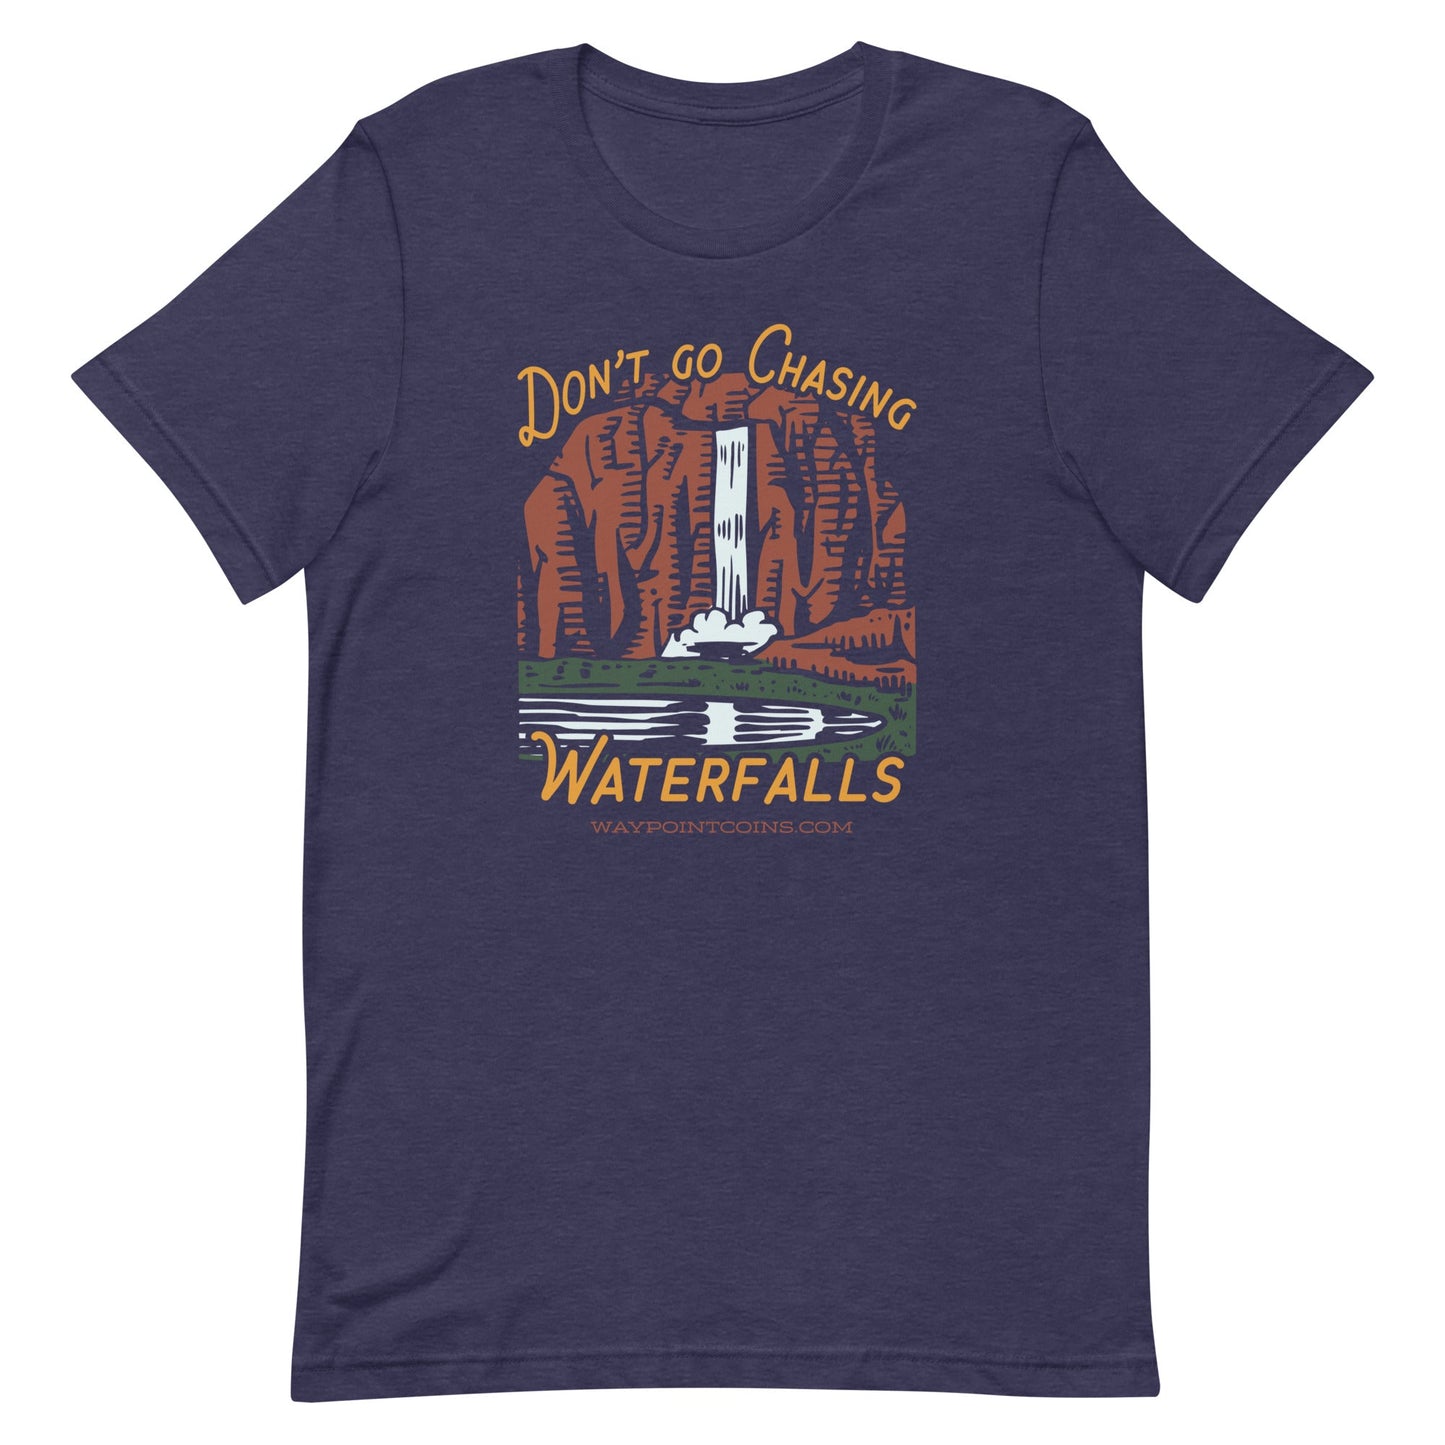 (Don't) Go Chasing Waterfalls Tee